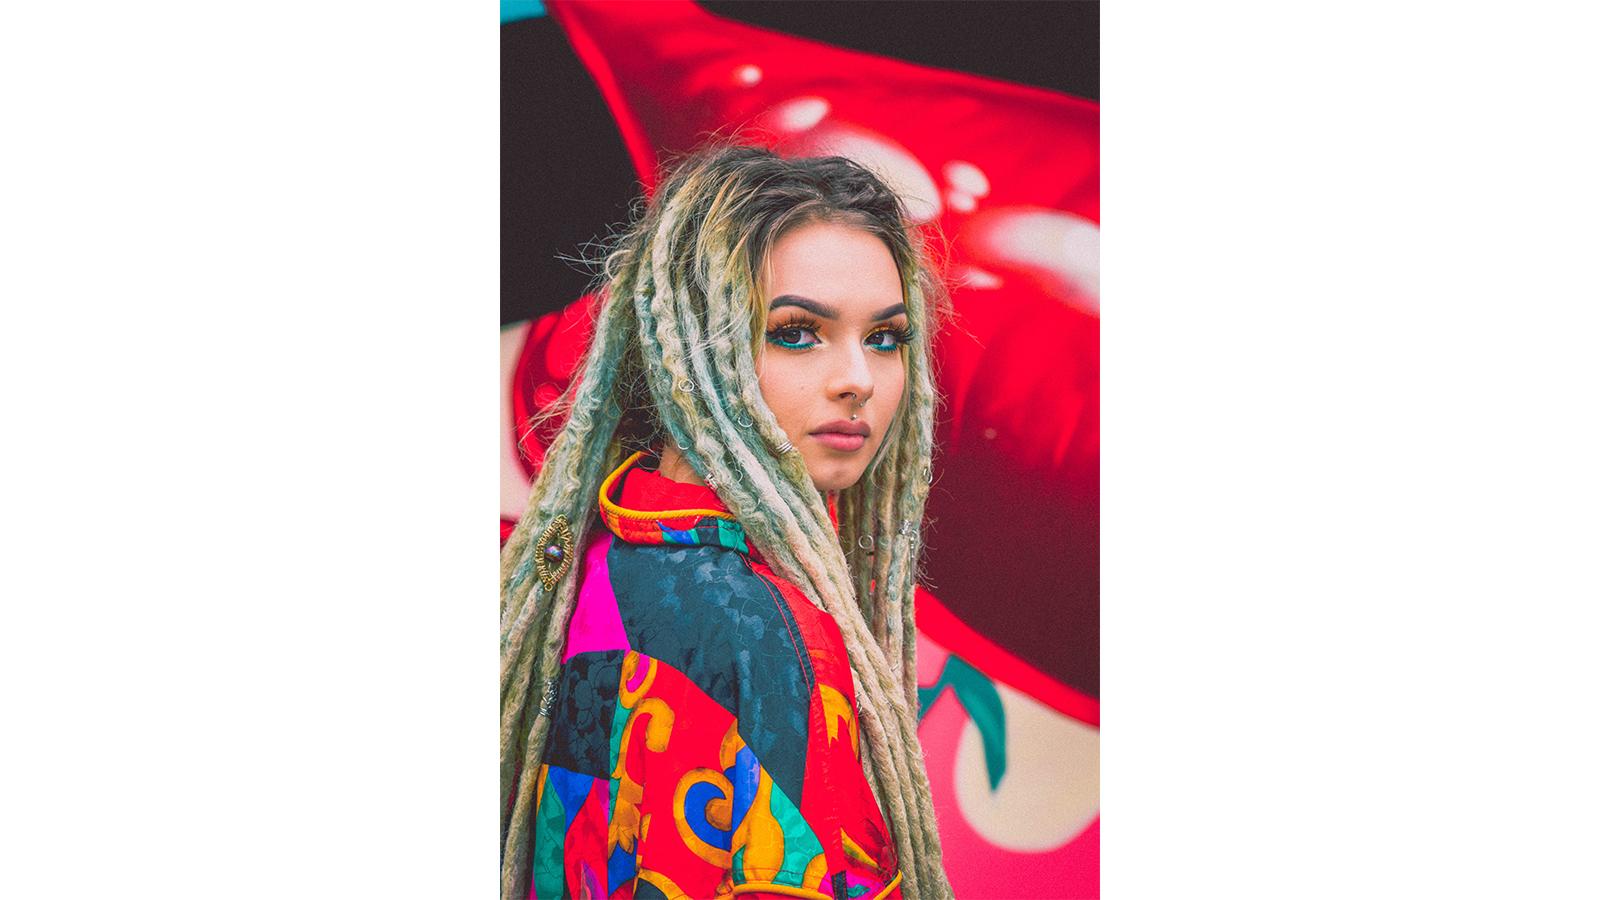 Zhavia signed to Columbia Records and collabed with French Montana